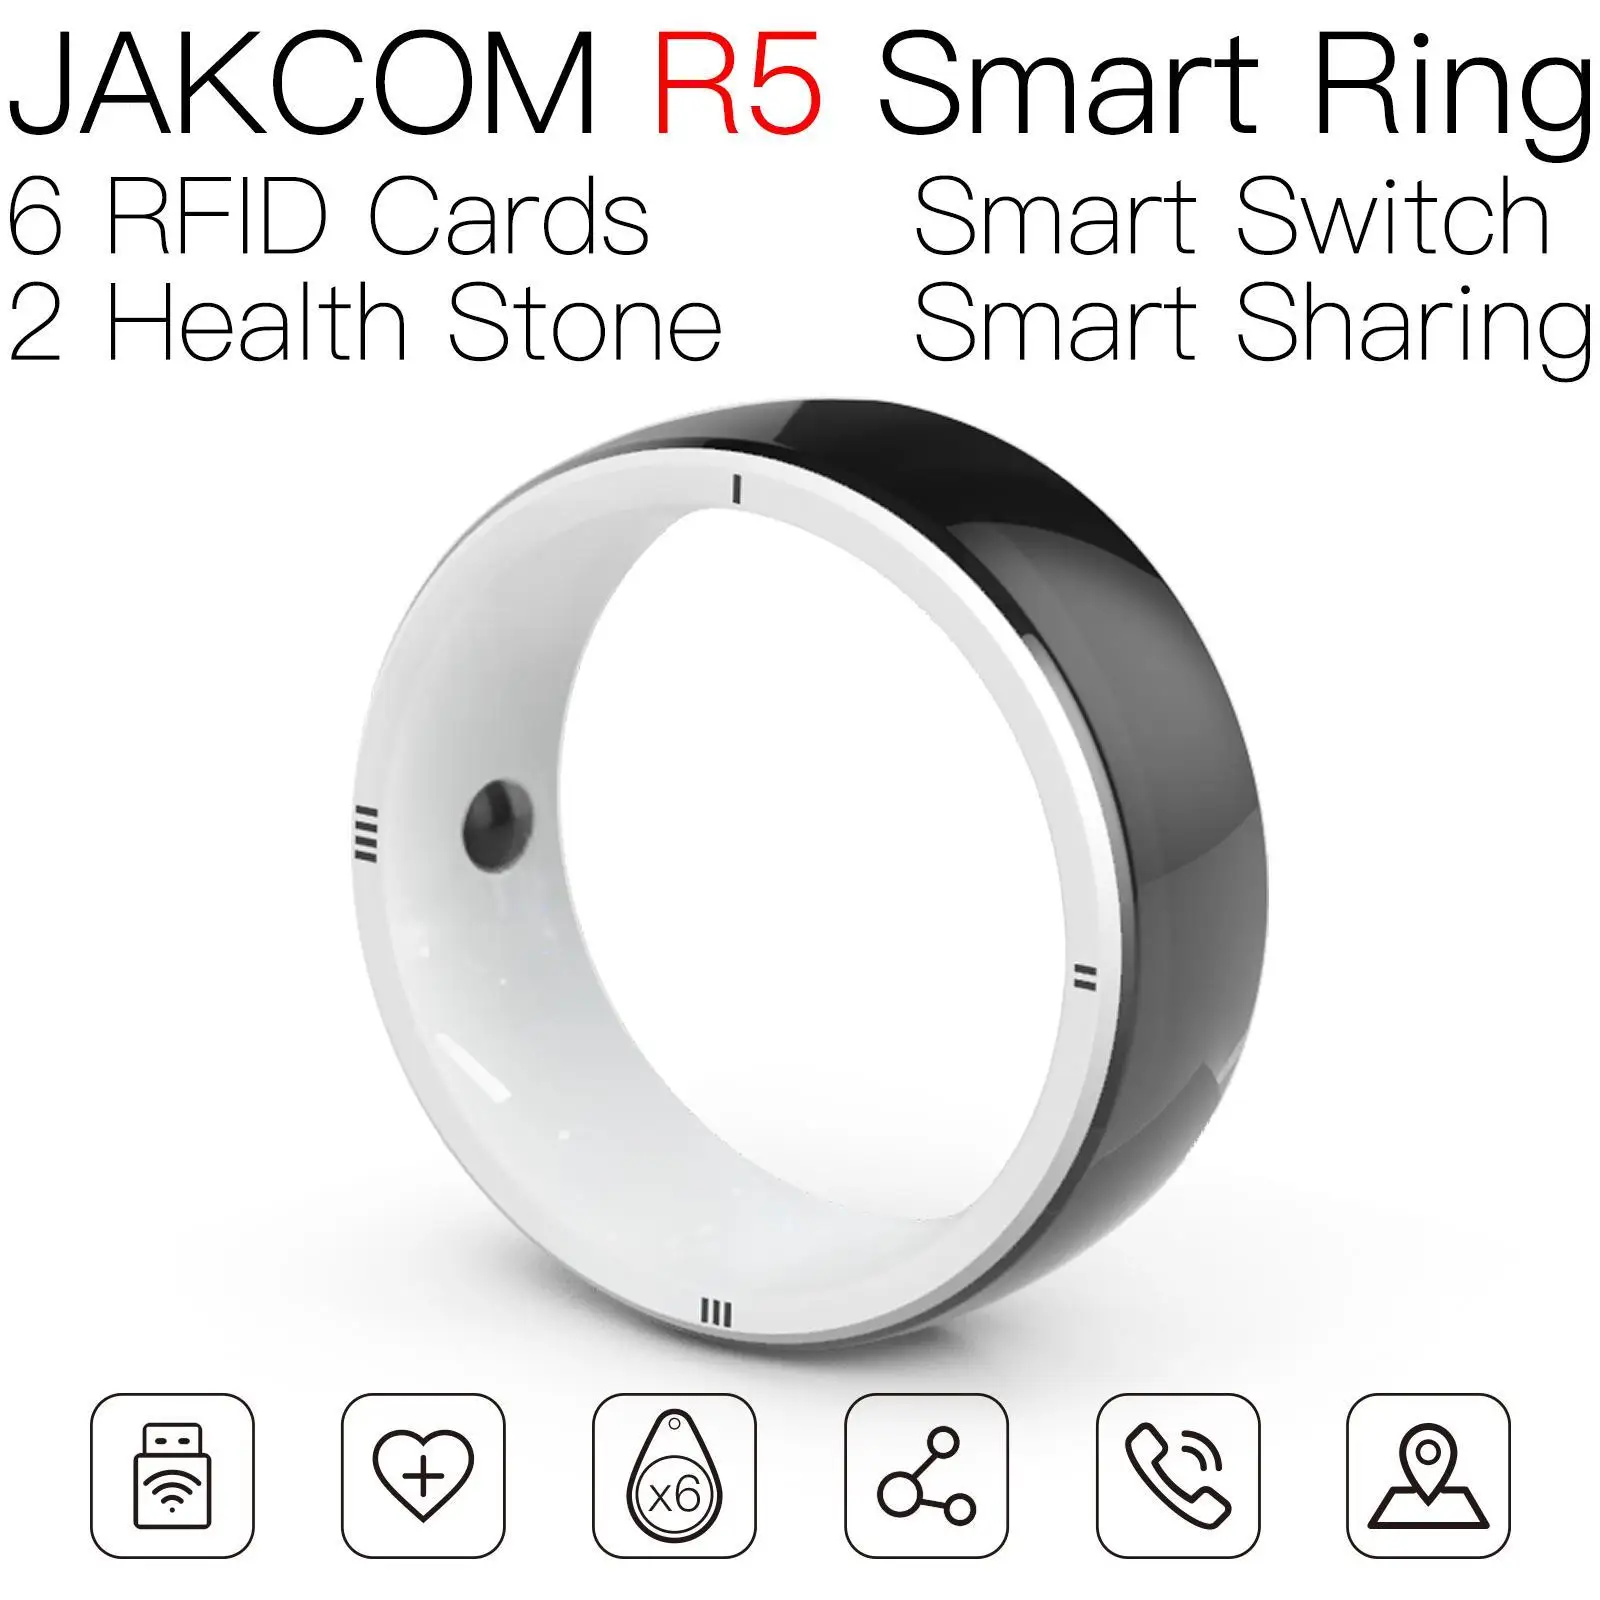 

JAKCOM R5 Smart Ring Super value as wasabi dx mode chip rfid tag sticker 125 paramount plus 1 year 7 byte id card